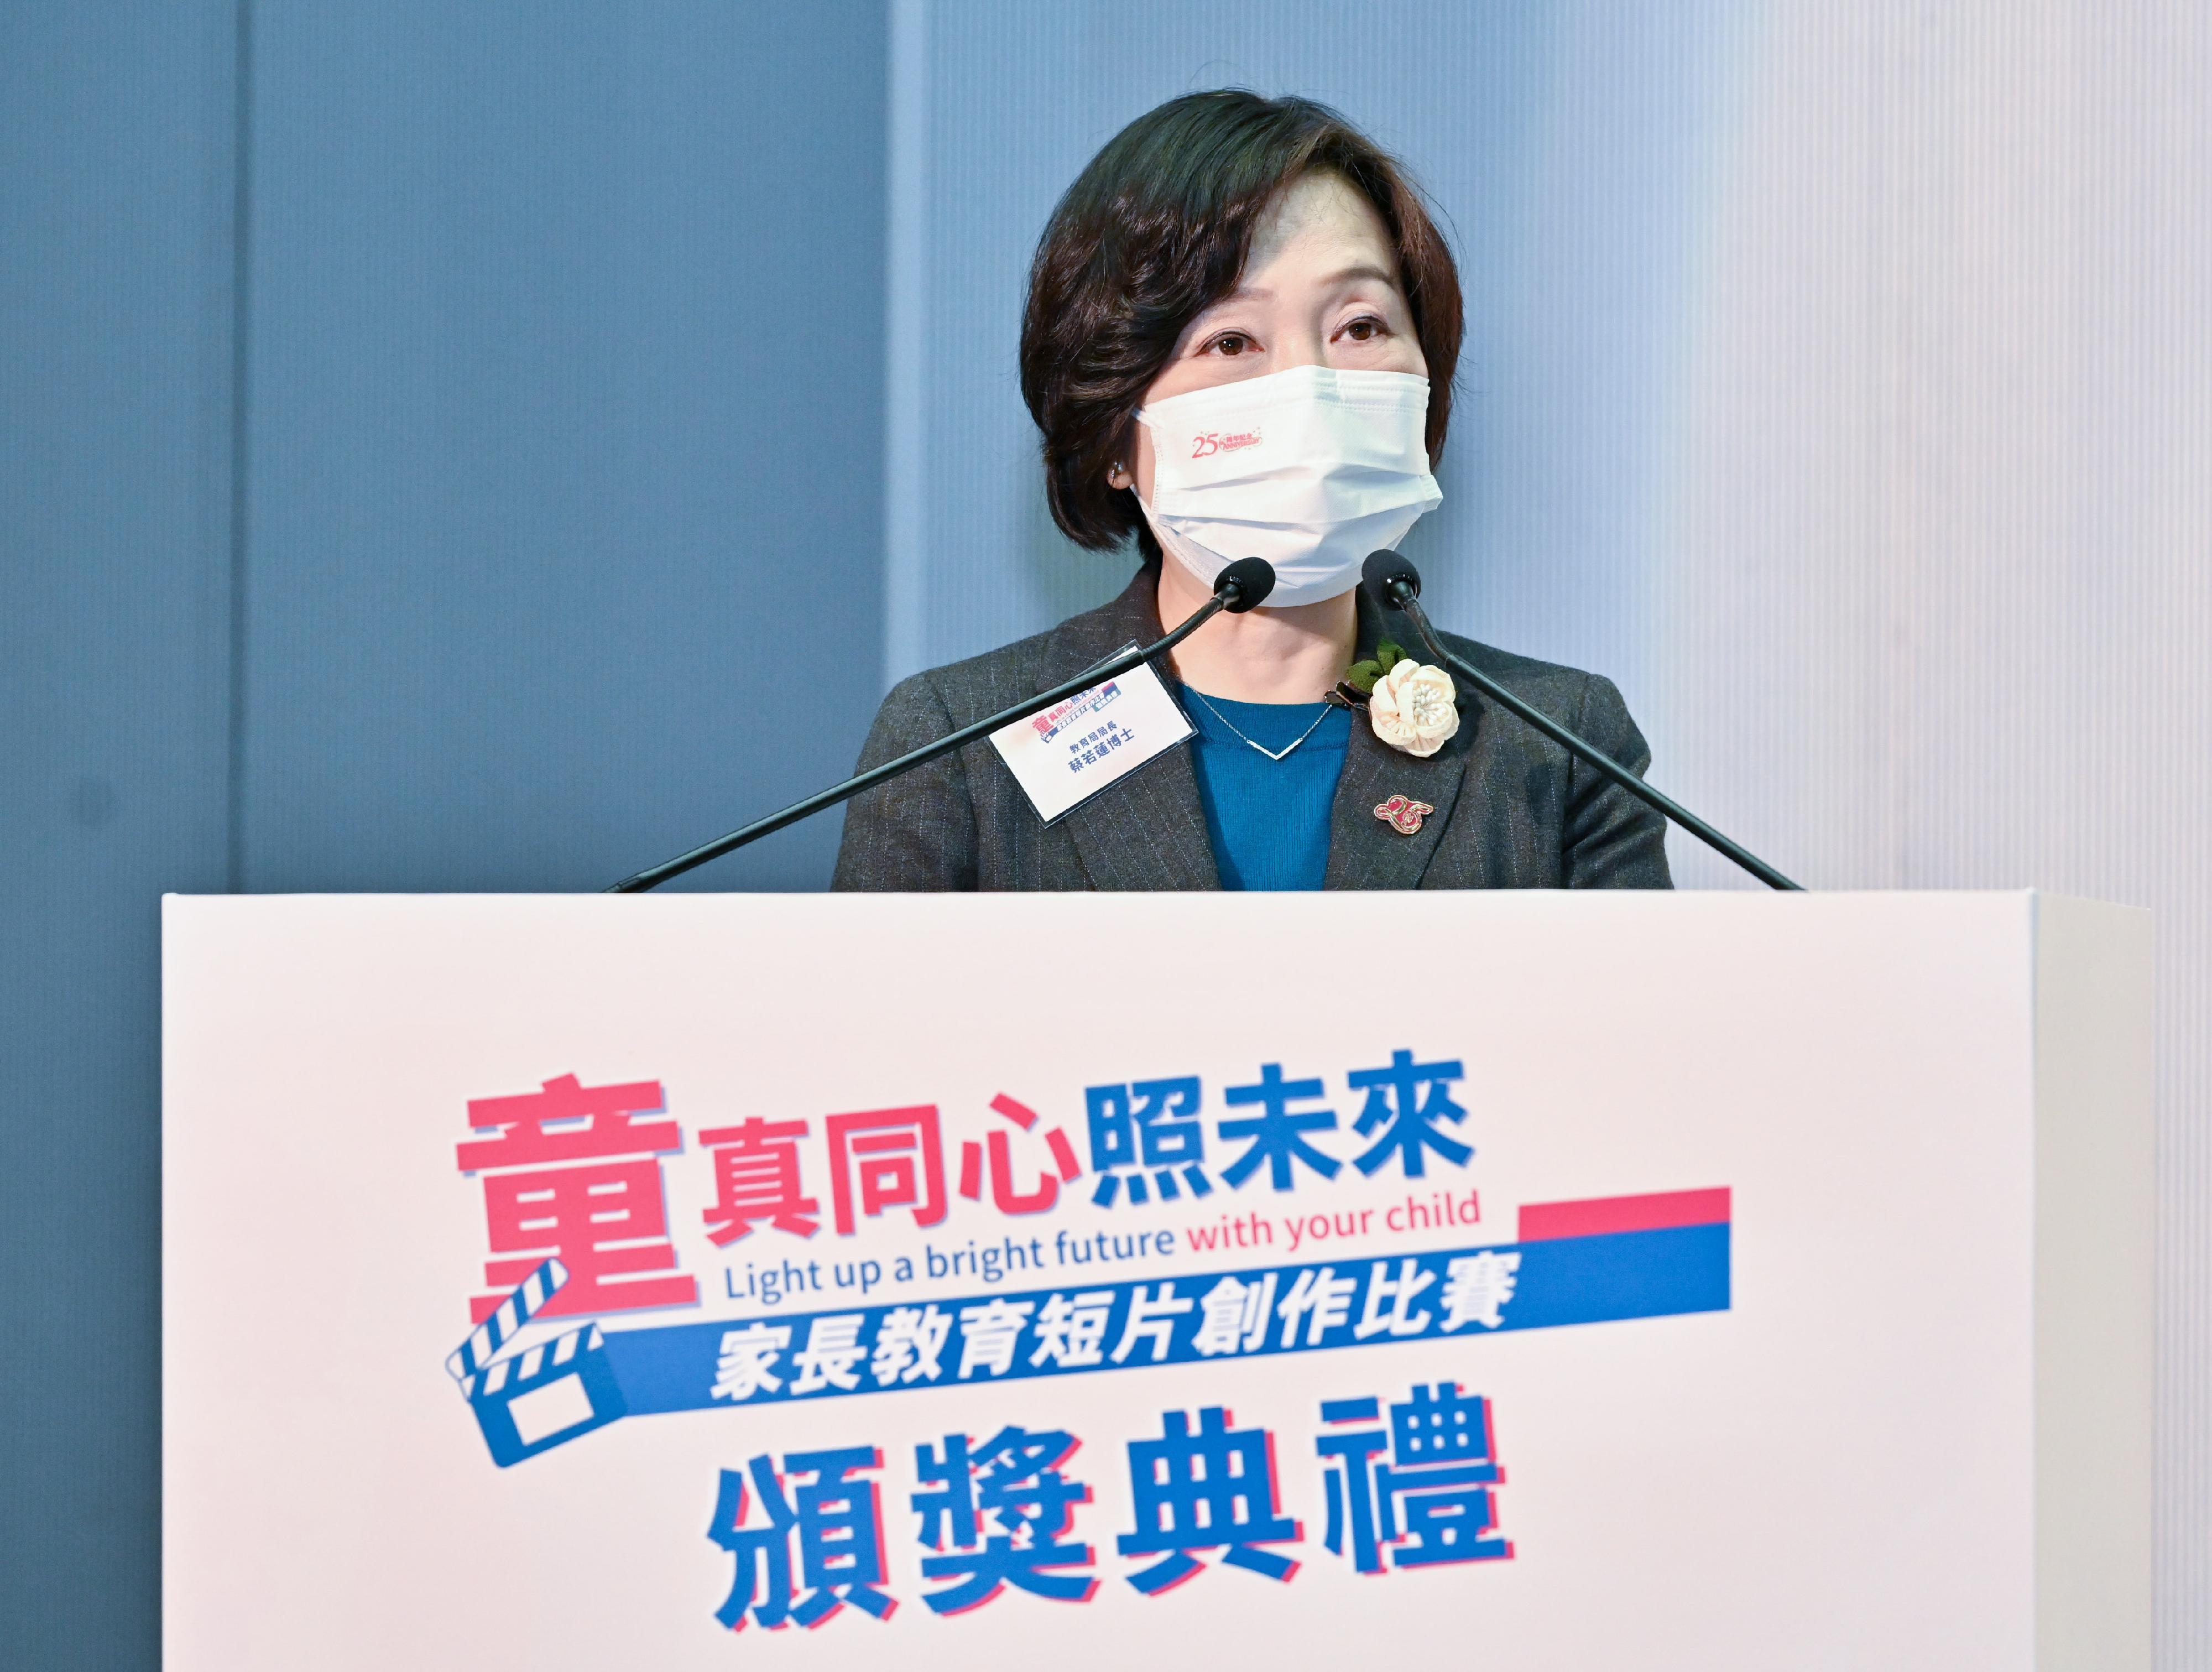 The Secretary for Education, Dr Choi Yuk-lin, speaks at the prize presentation ceremony cum exhibition for Light Up a Bright Future with Your Child video production competition on parent education today (November 26).